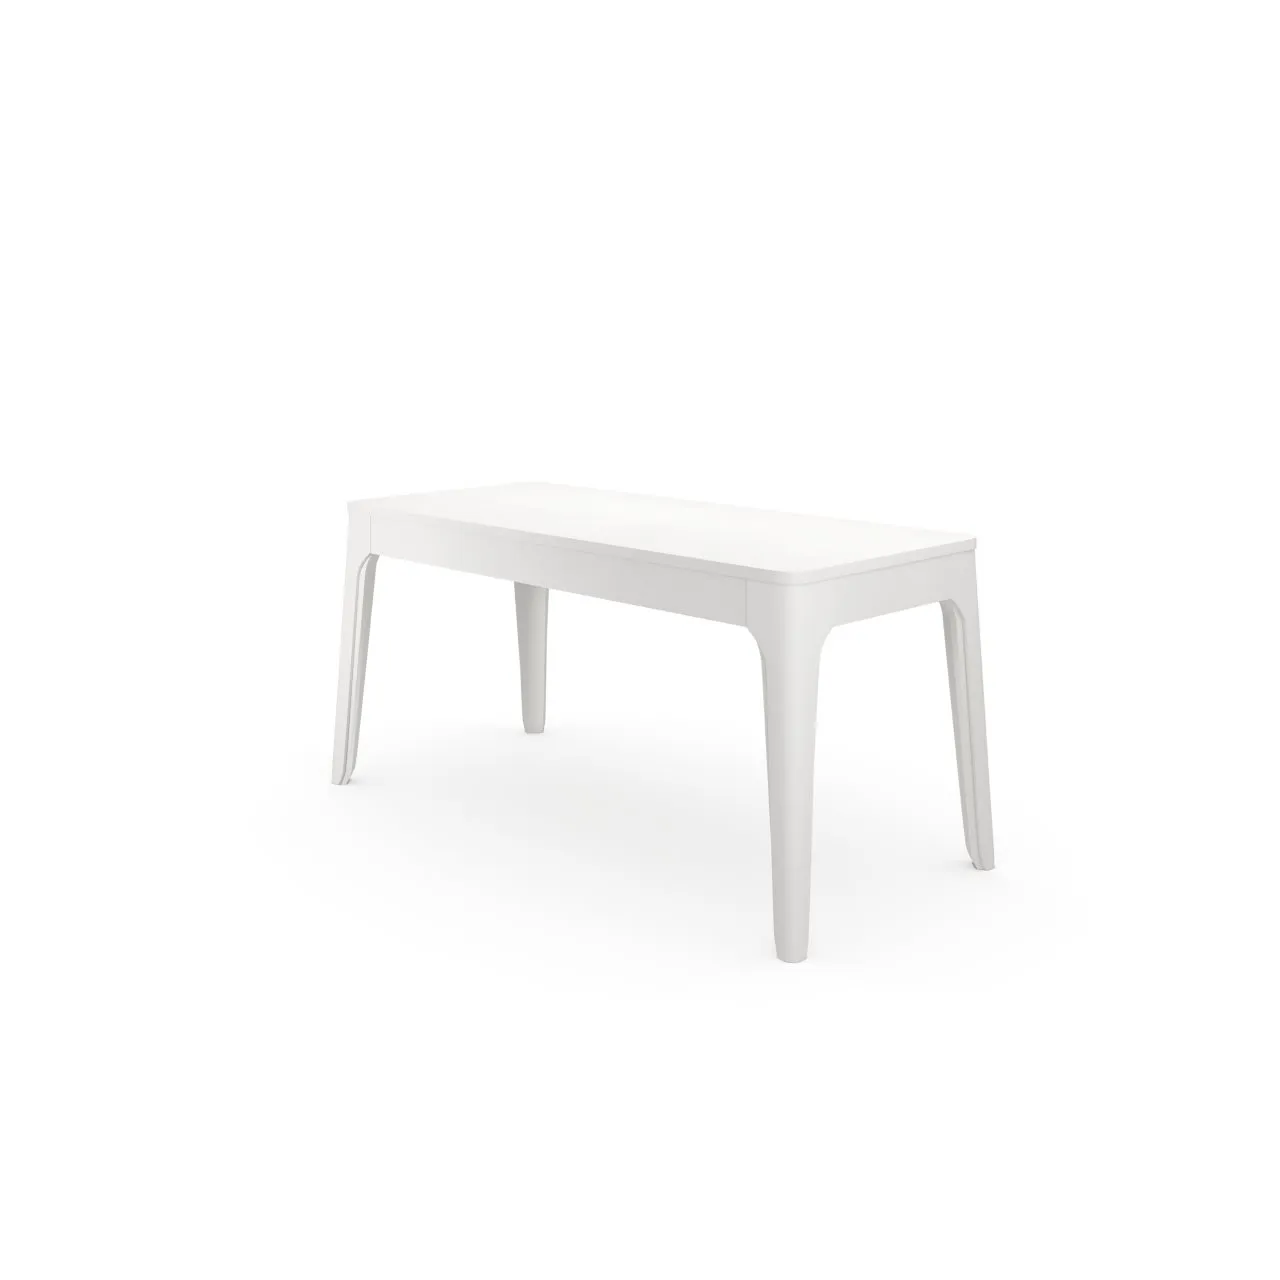 MADRAS WRITING TABLE IN LINO BIANCO (WHITE)